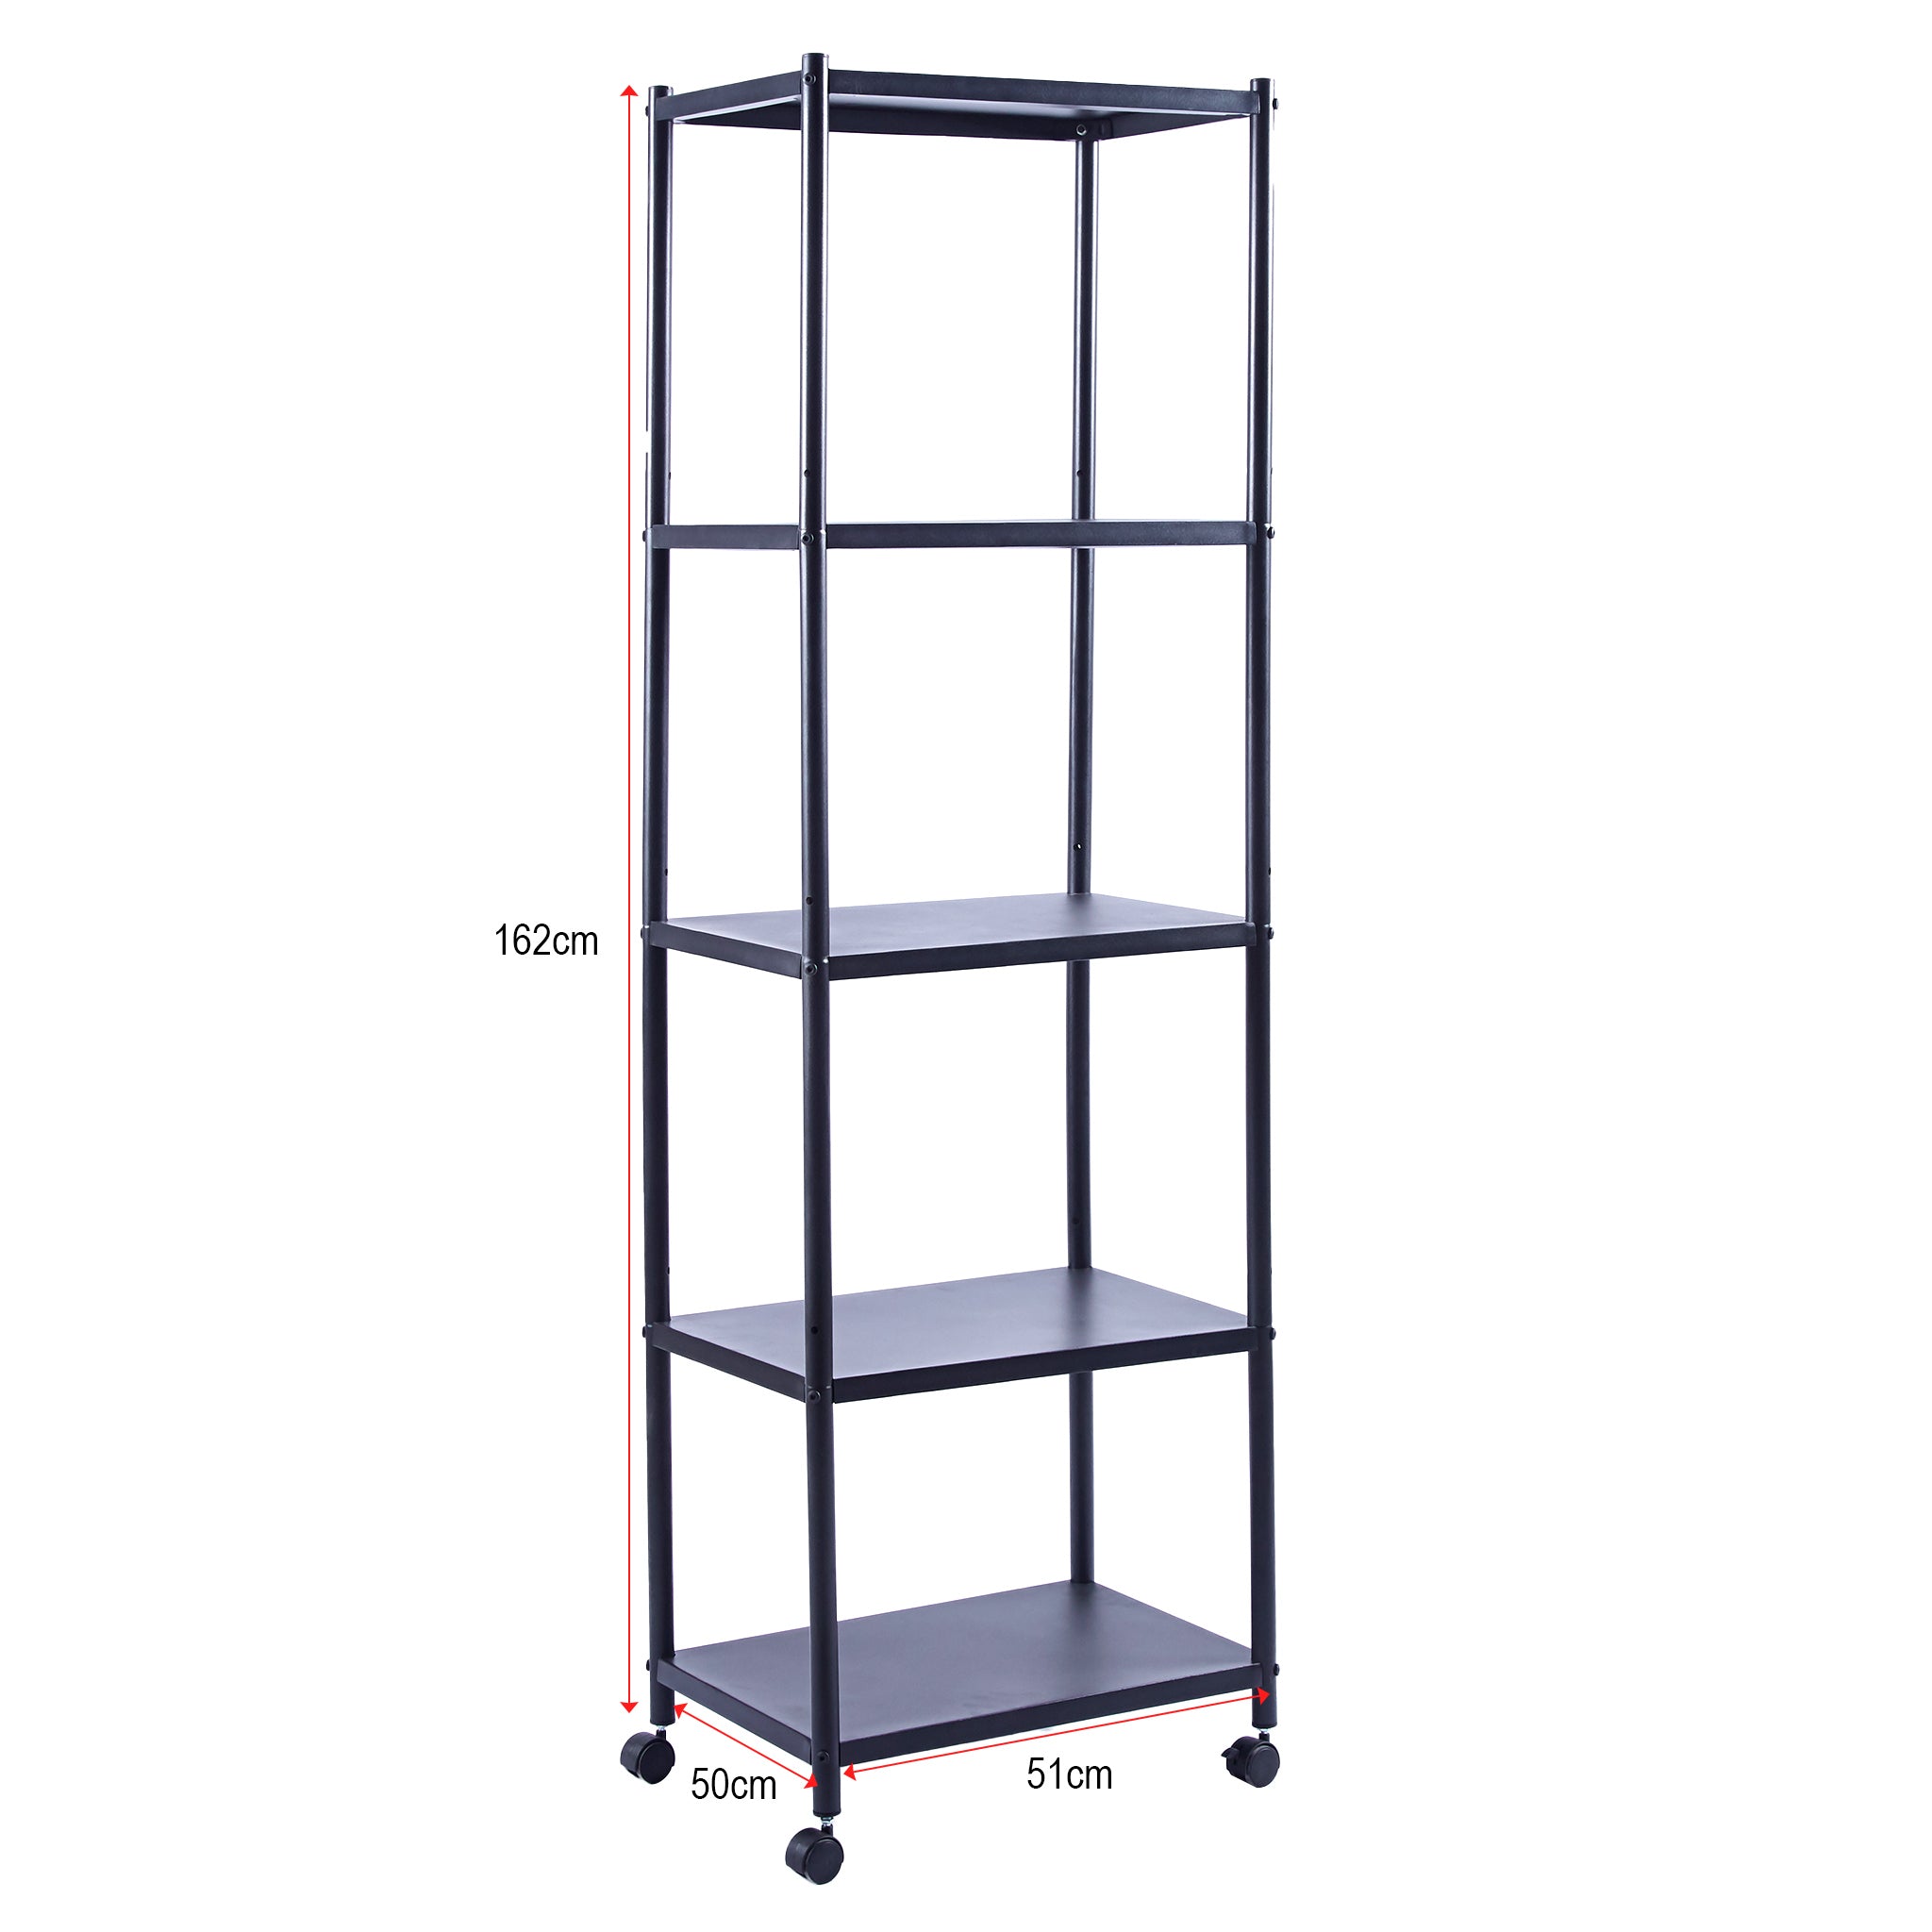 Mobile Kitchen Shelf with 5 Shelves model SF-110 for organized storage3